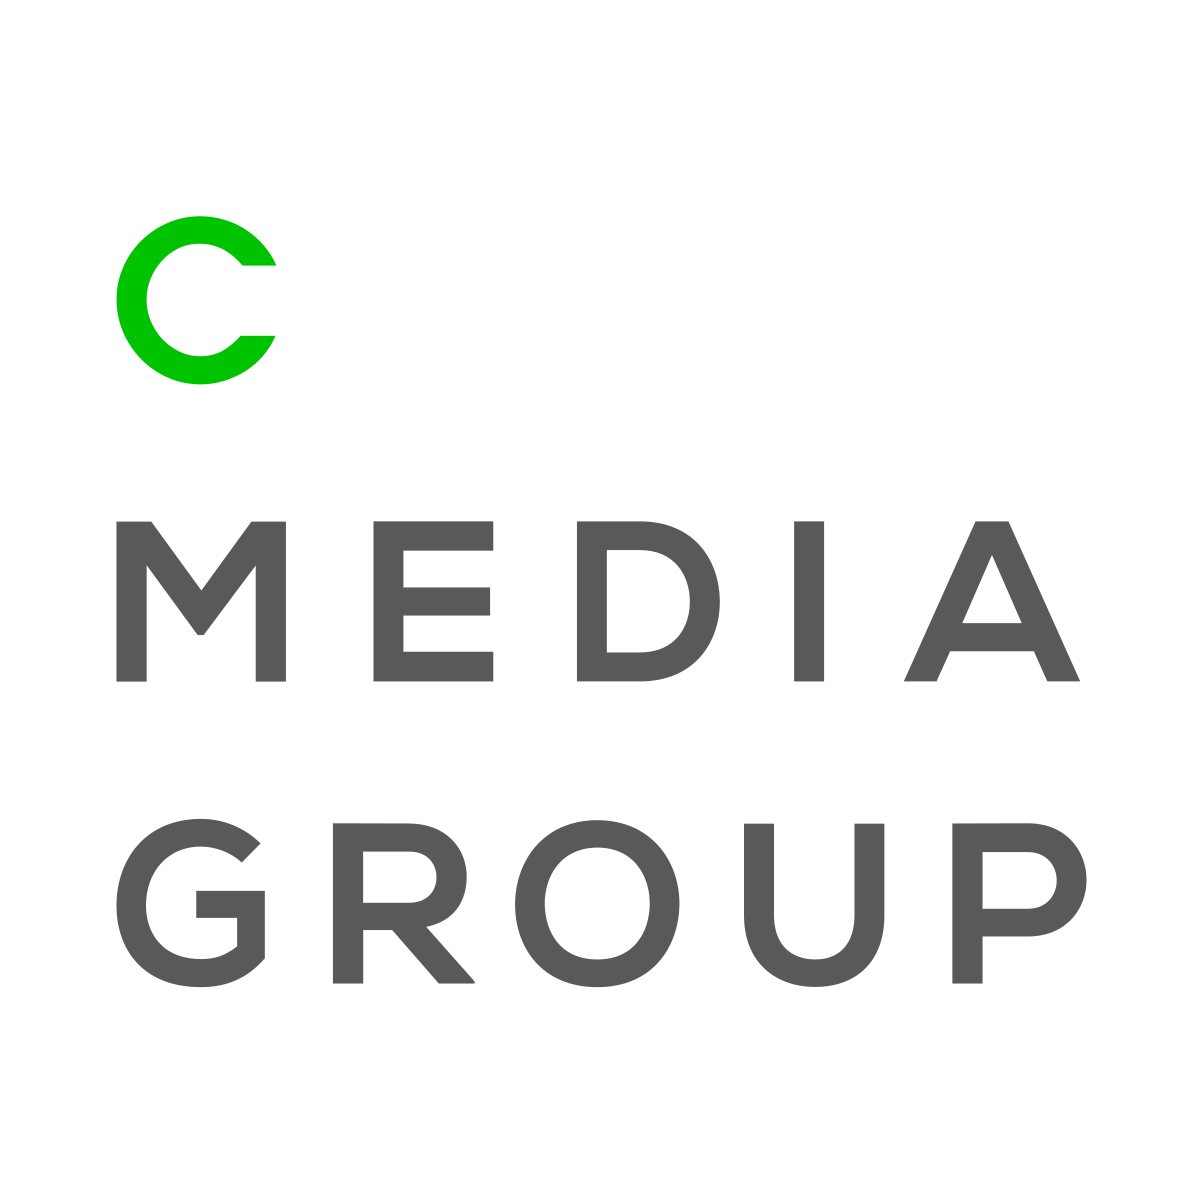 theCHIVE Logo - Chive Media Group